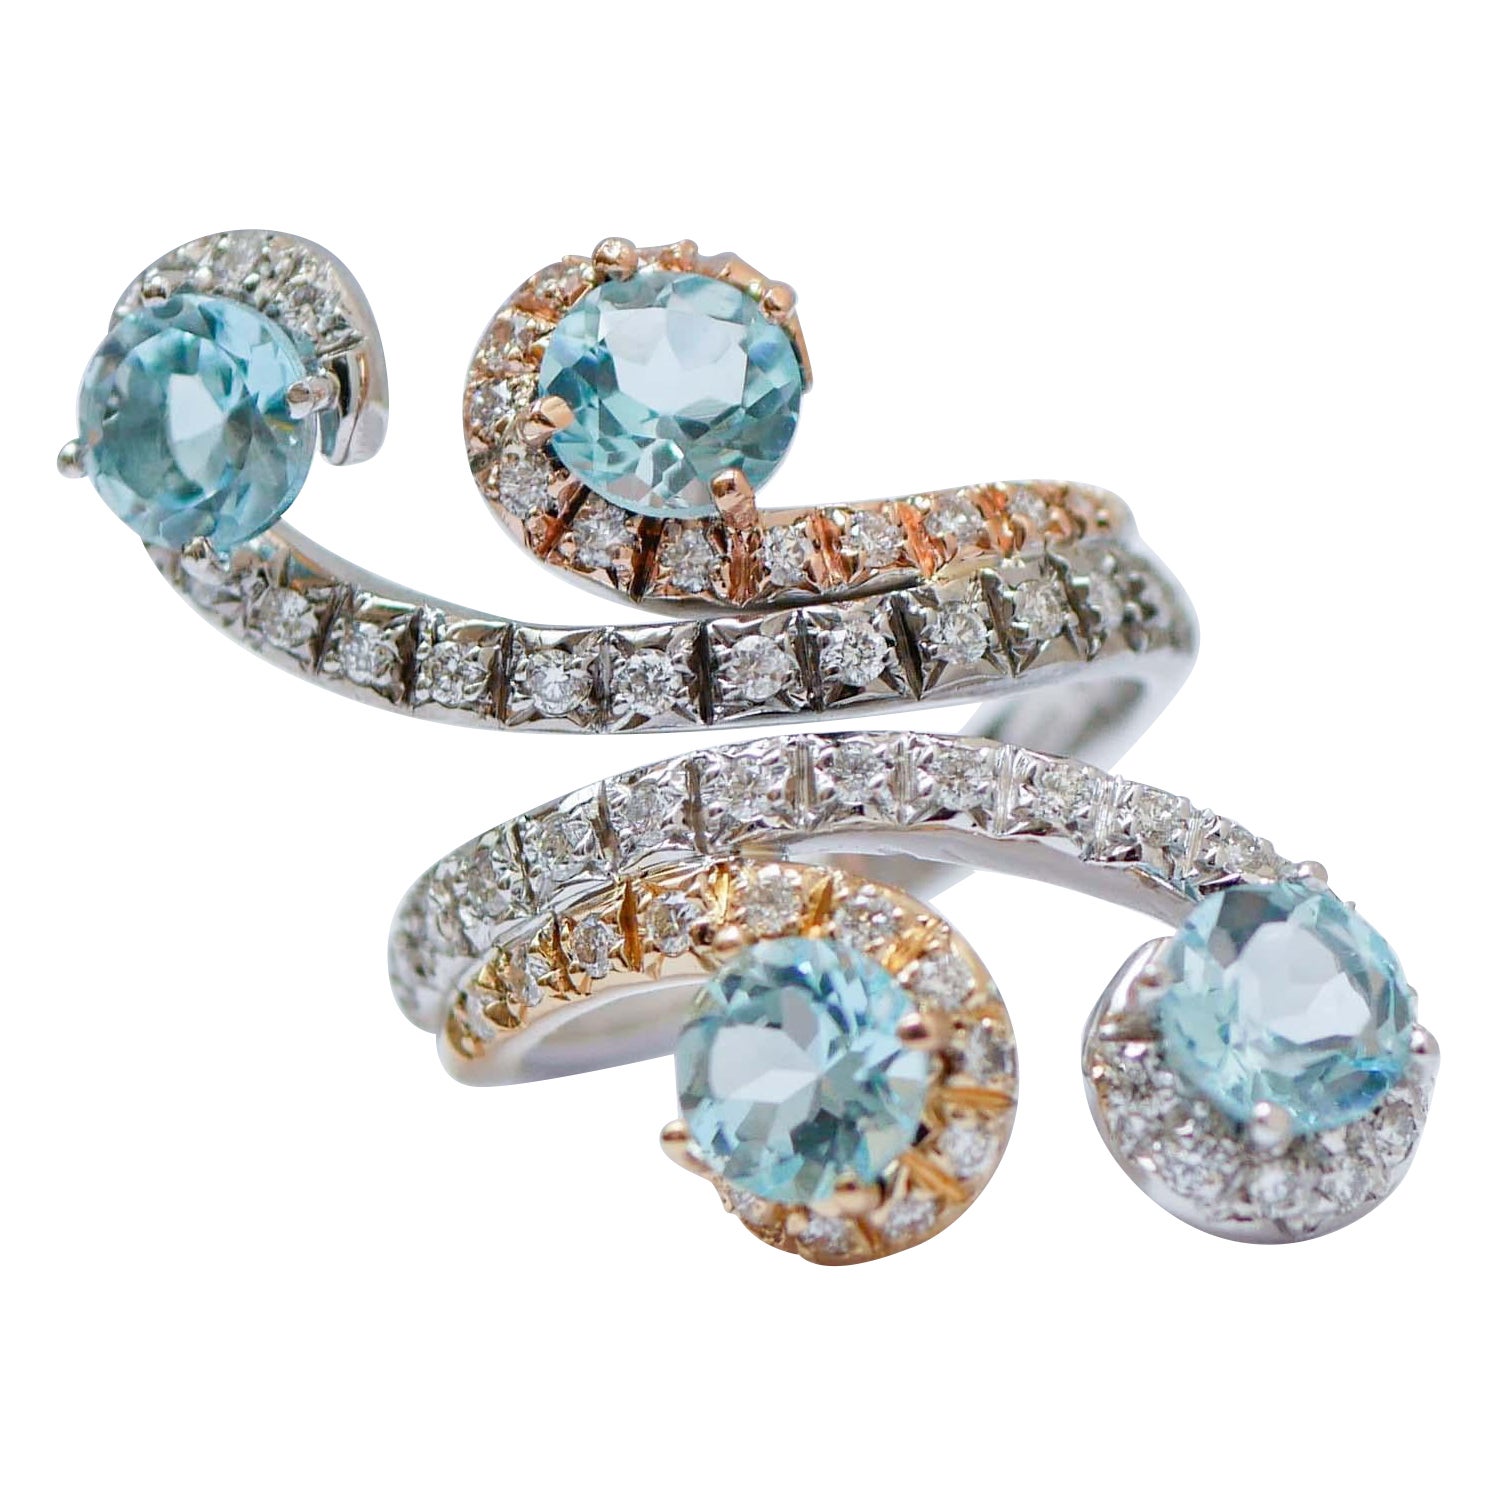 Aquamarine Colour Topazs, Diamonds, 18Kt White Gold, Rose Gold, Yellow Gold Ring For Sale